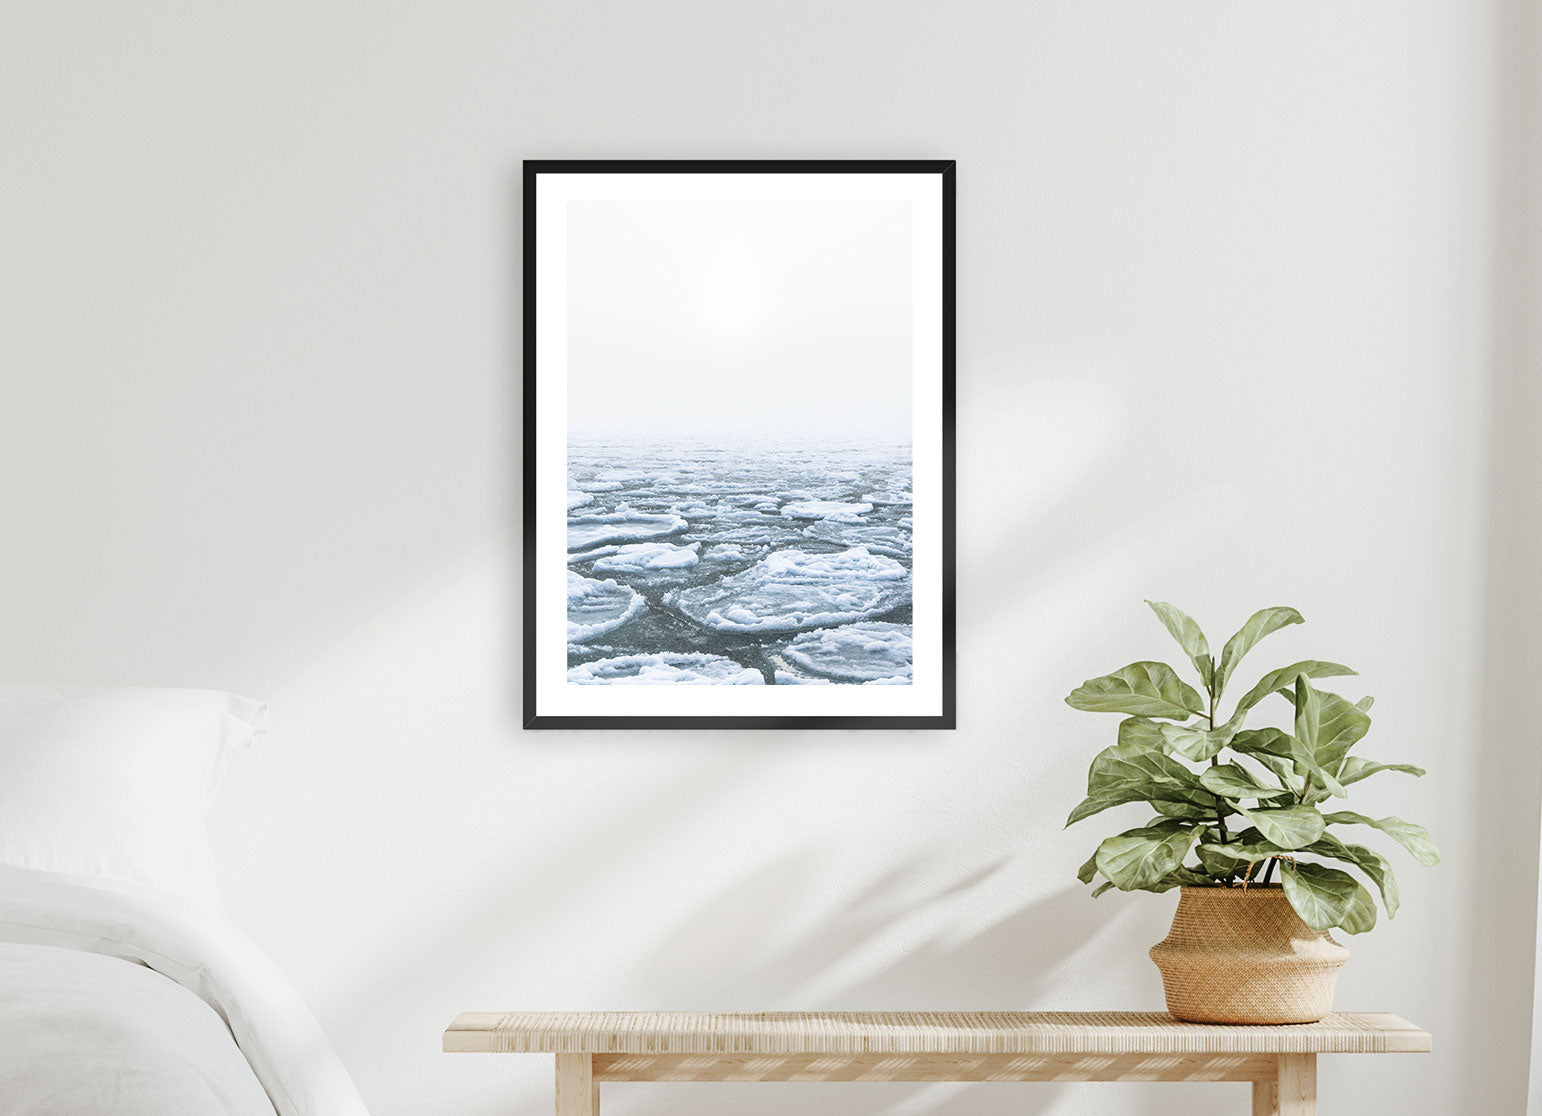 A framed print of ice pans in fog